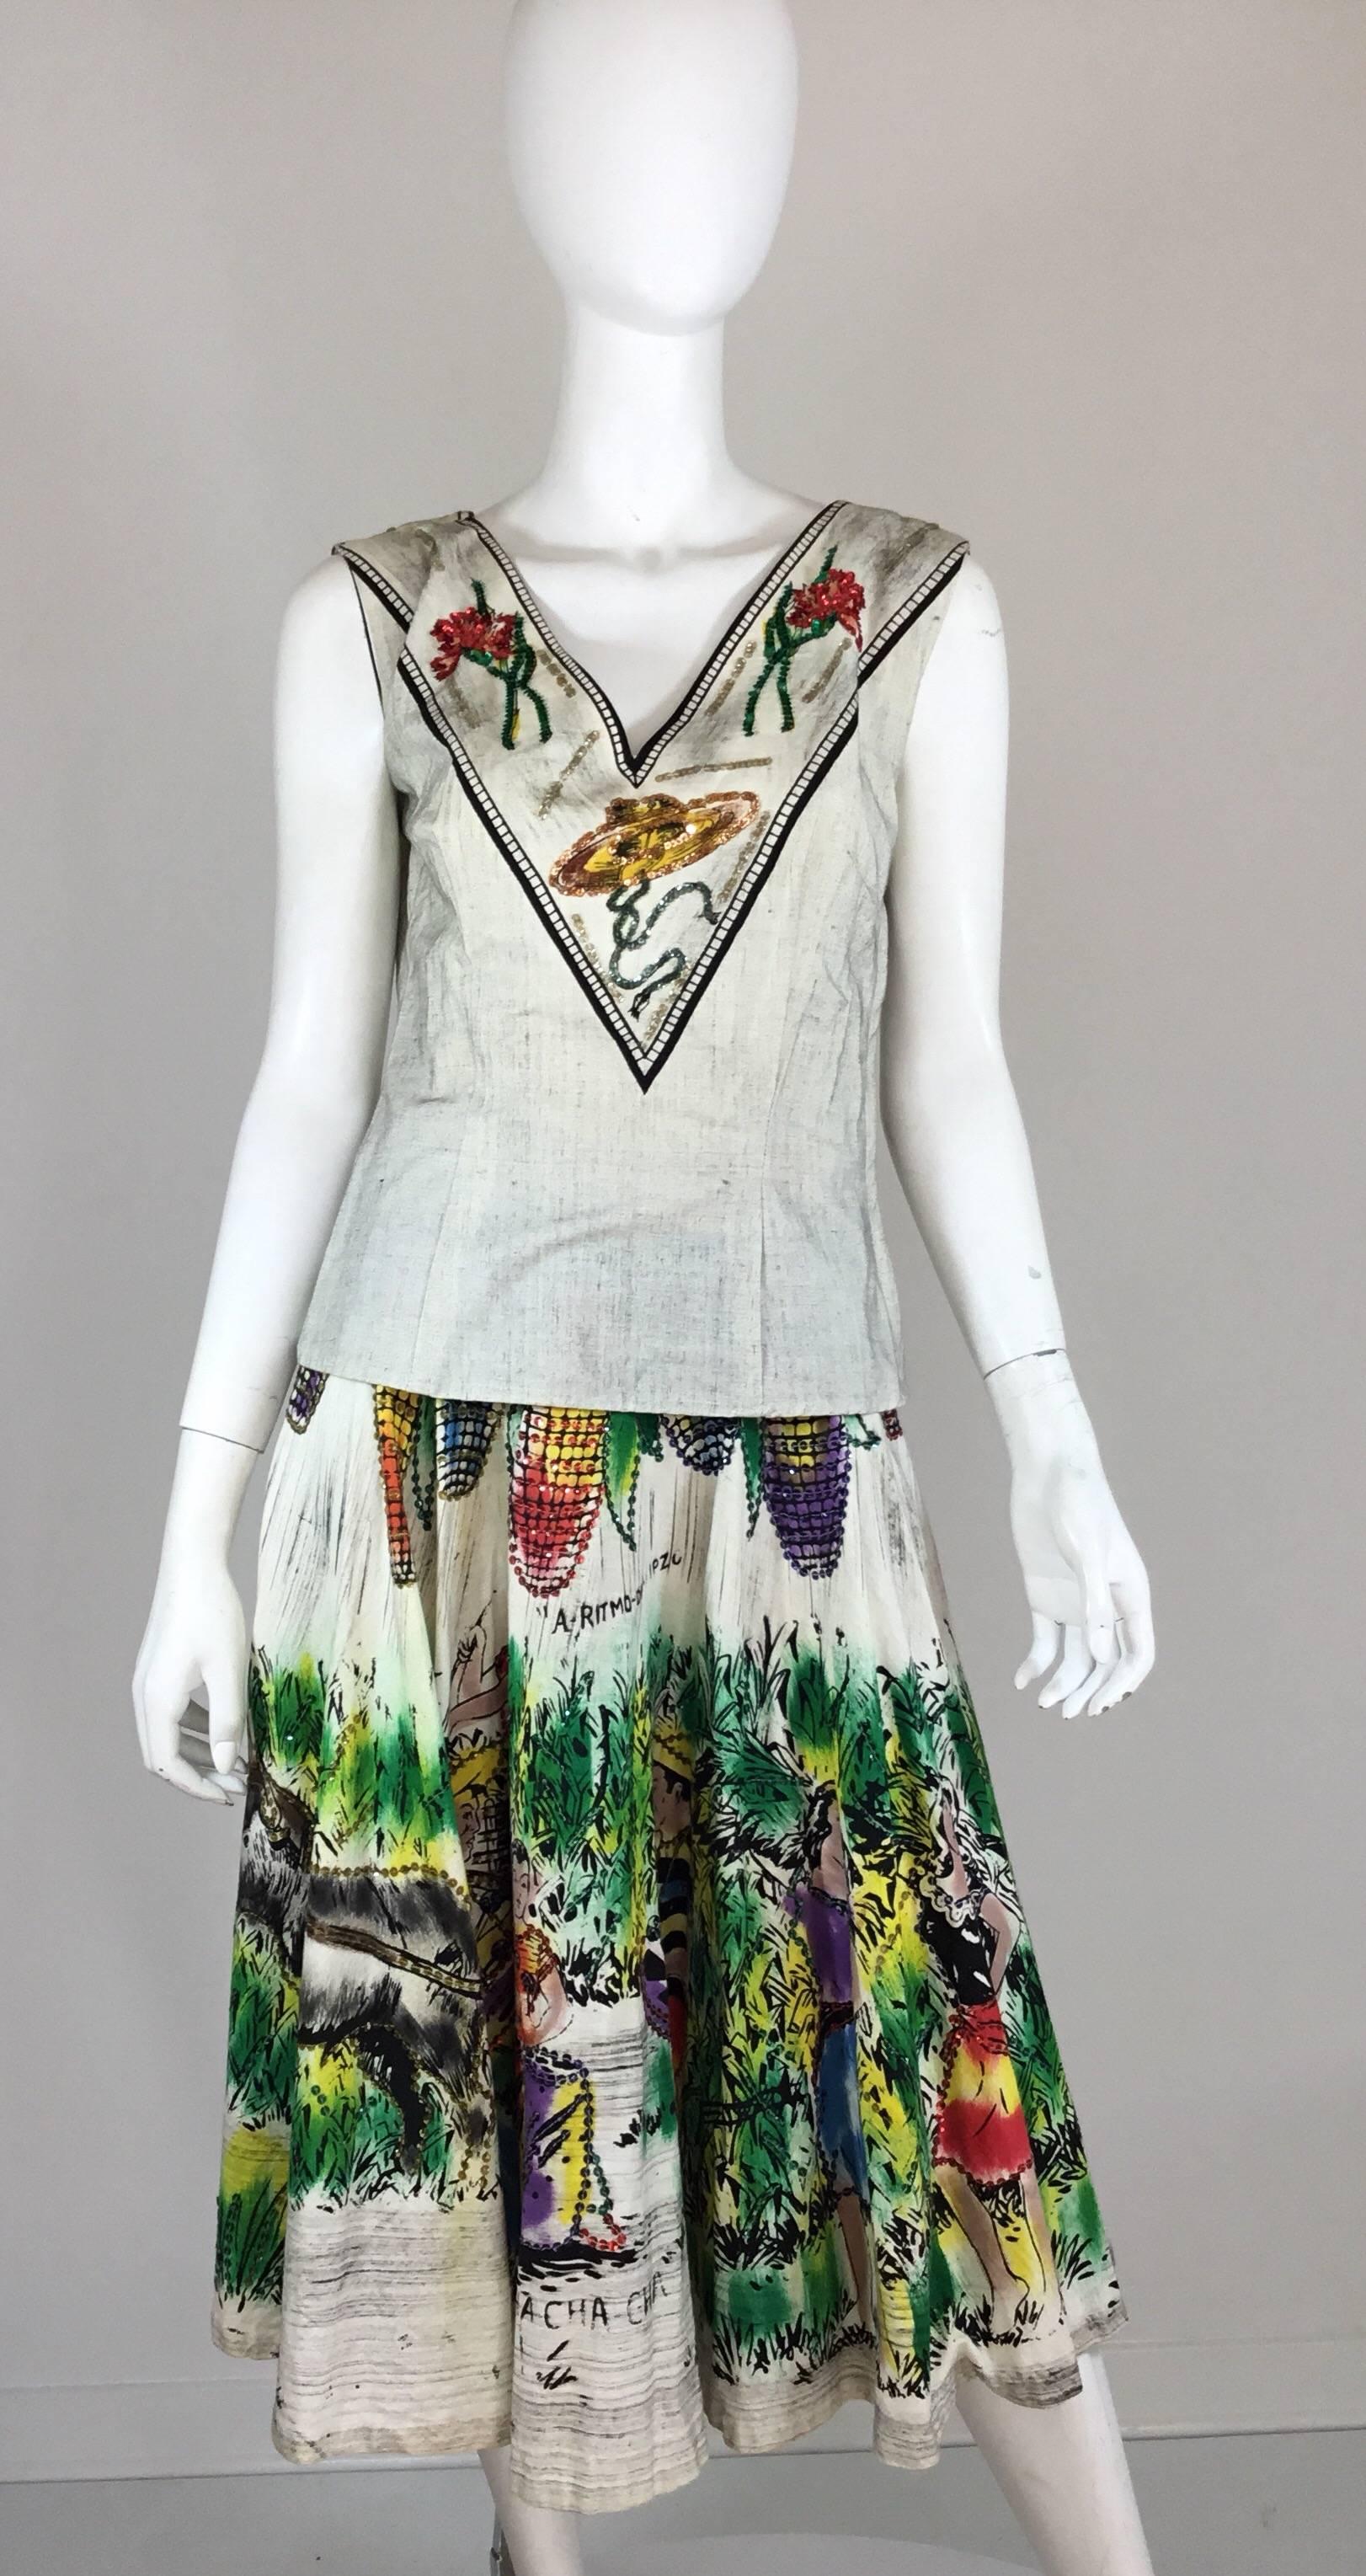 A Ritmo de Calypso, Calypso, Musicians, Londy of Mexico 1950s Mexican tourista hand painted and sequins embellished circle skirt and matching top. Made from hand-painted cotton with sequin detailing. Top has a V-neckline and a metal side zipper